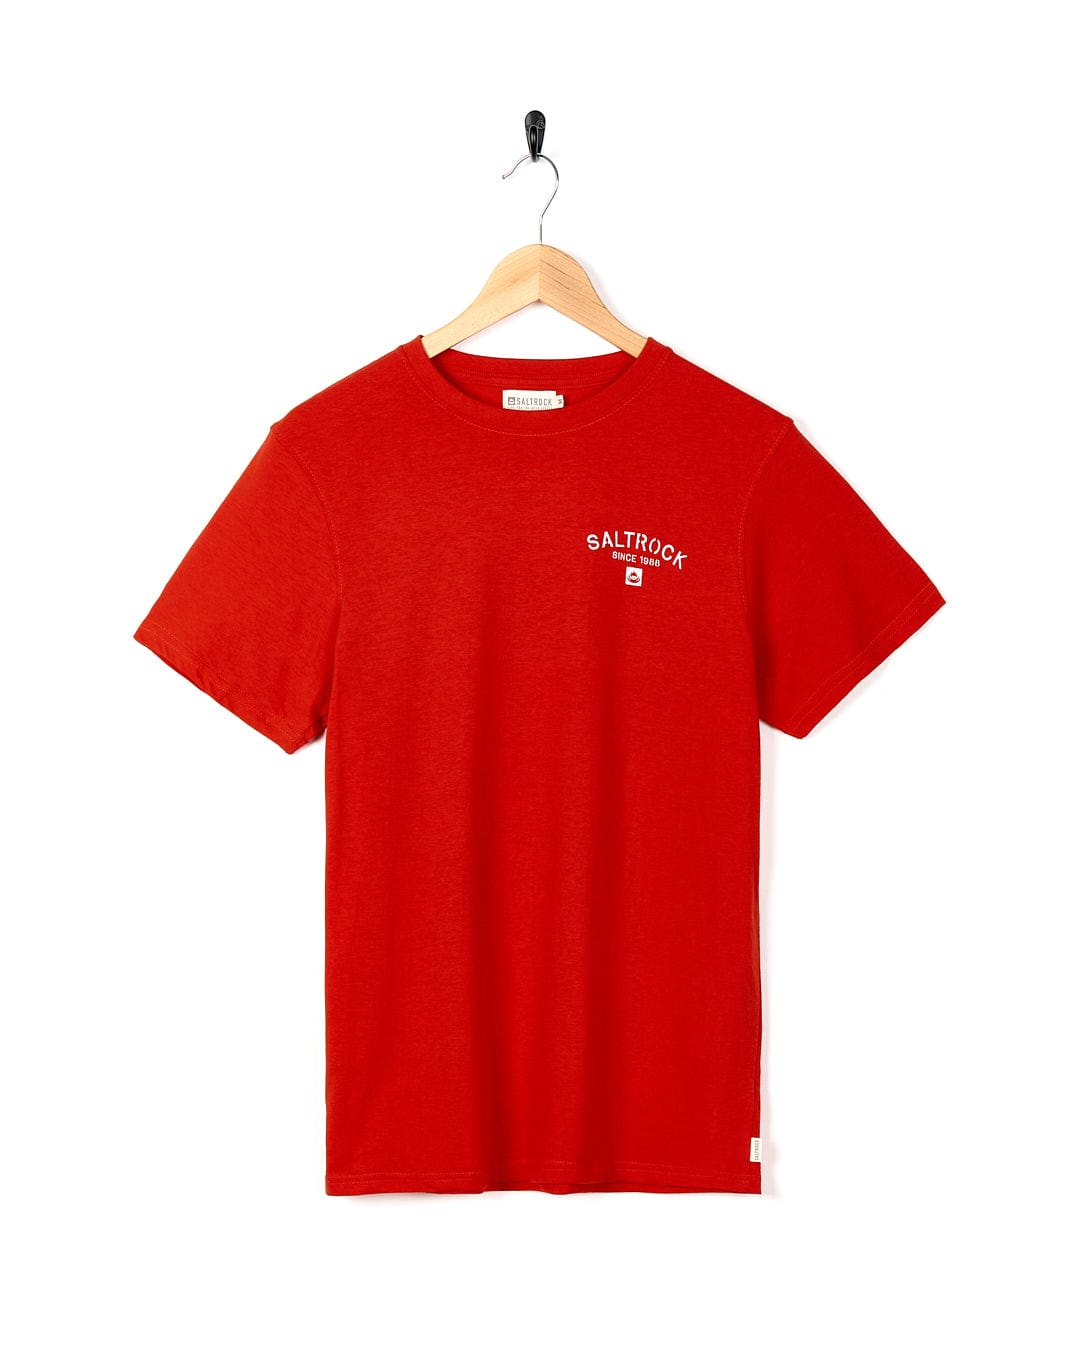 A Saltrock Stencil - Mens Lyme Regis Location T-Shirt - Red with a white logo on it.